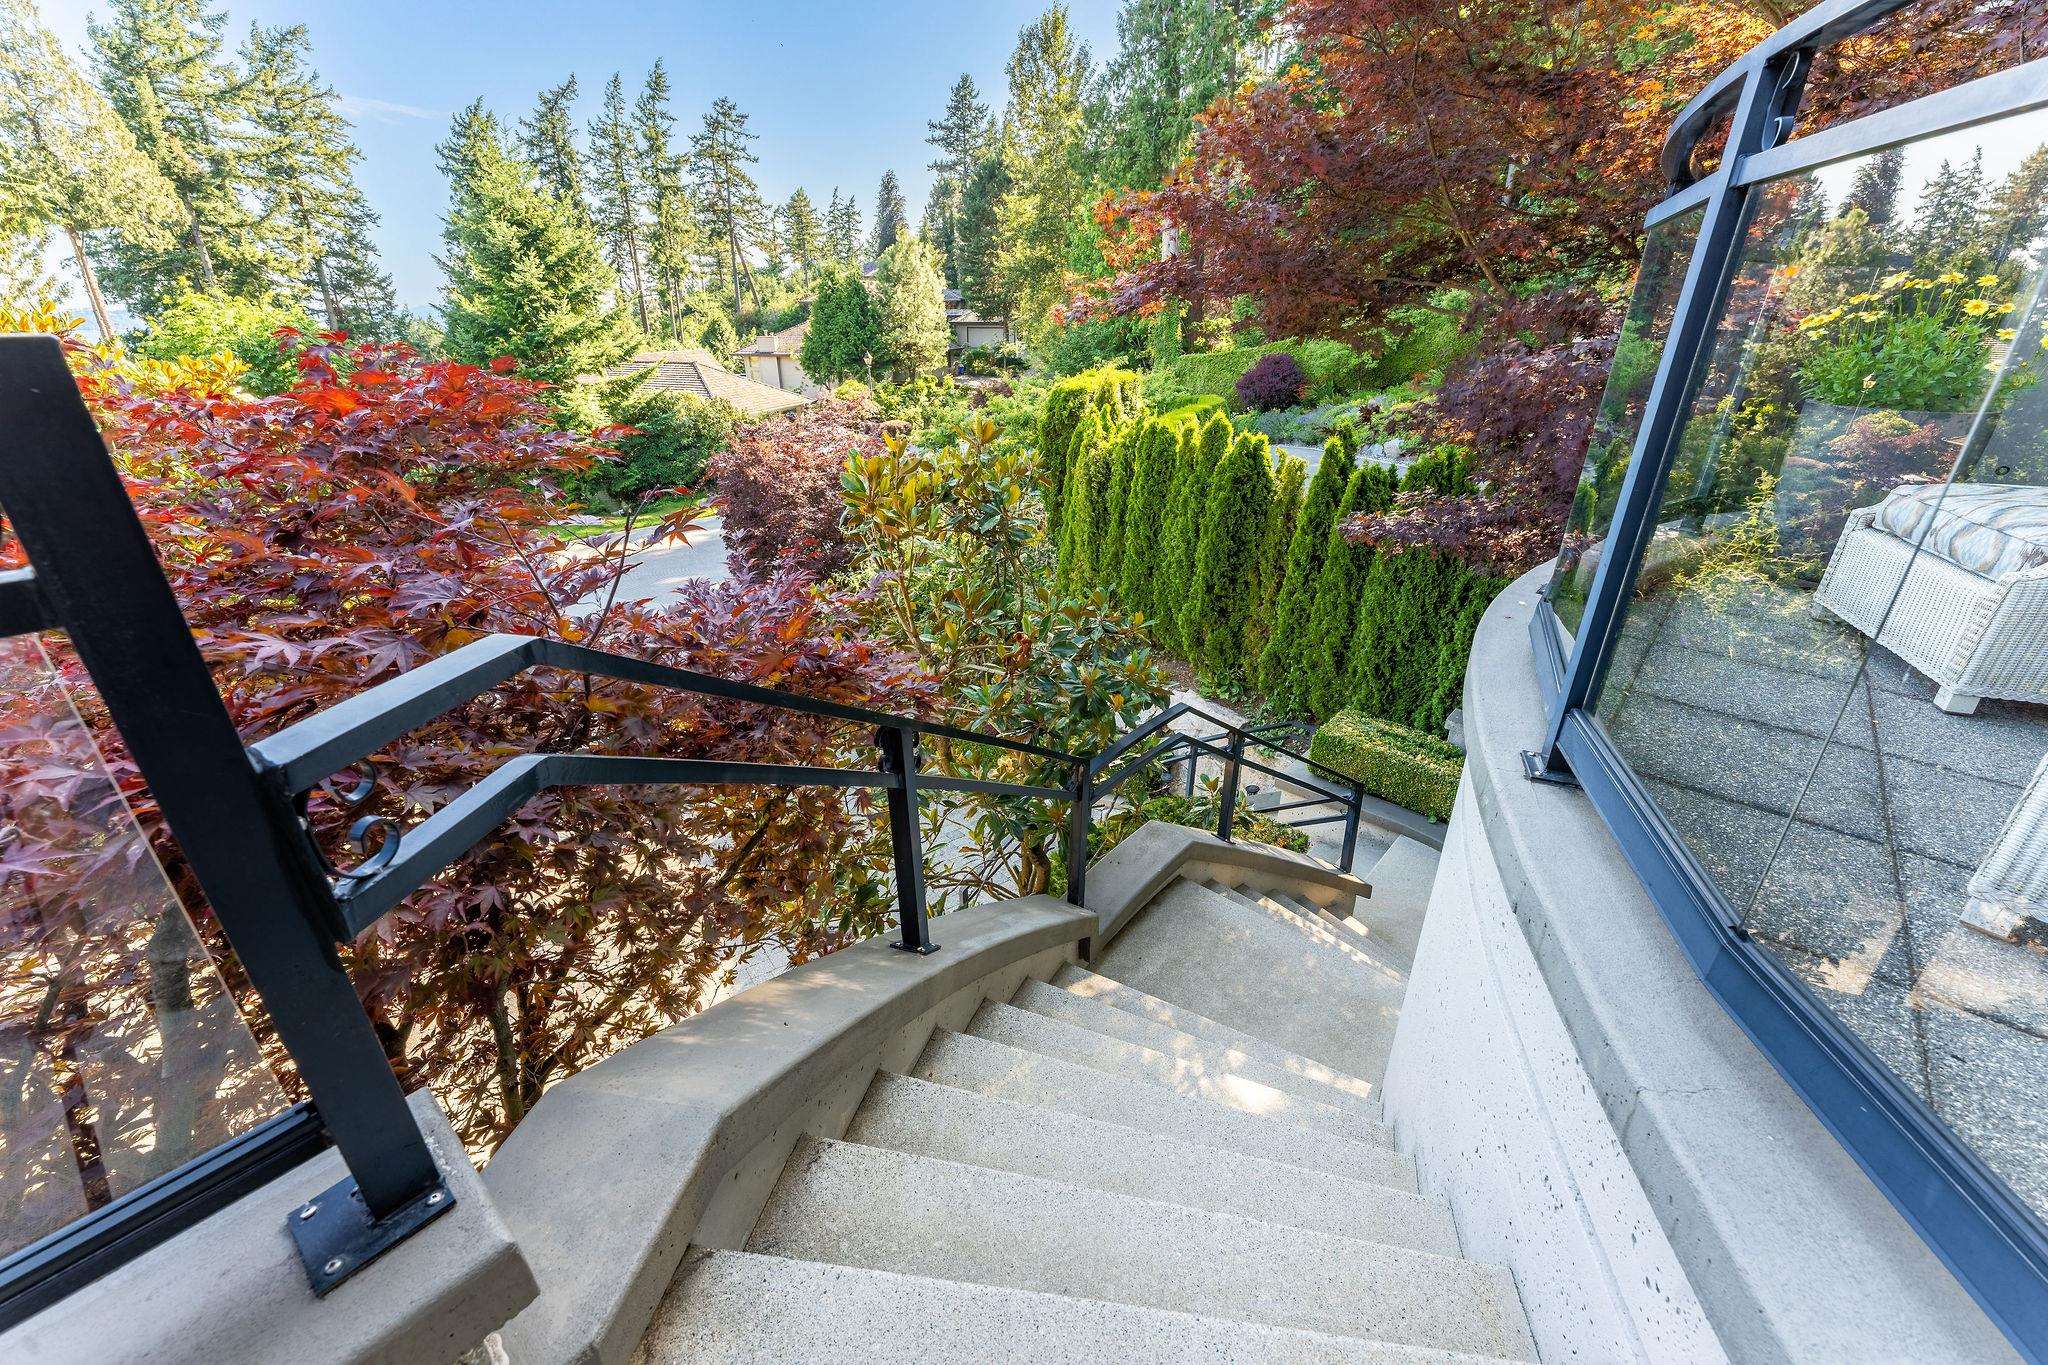 Listing image of 4845 VISTA PLACE